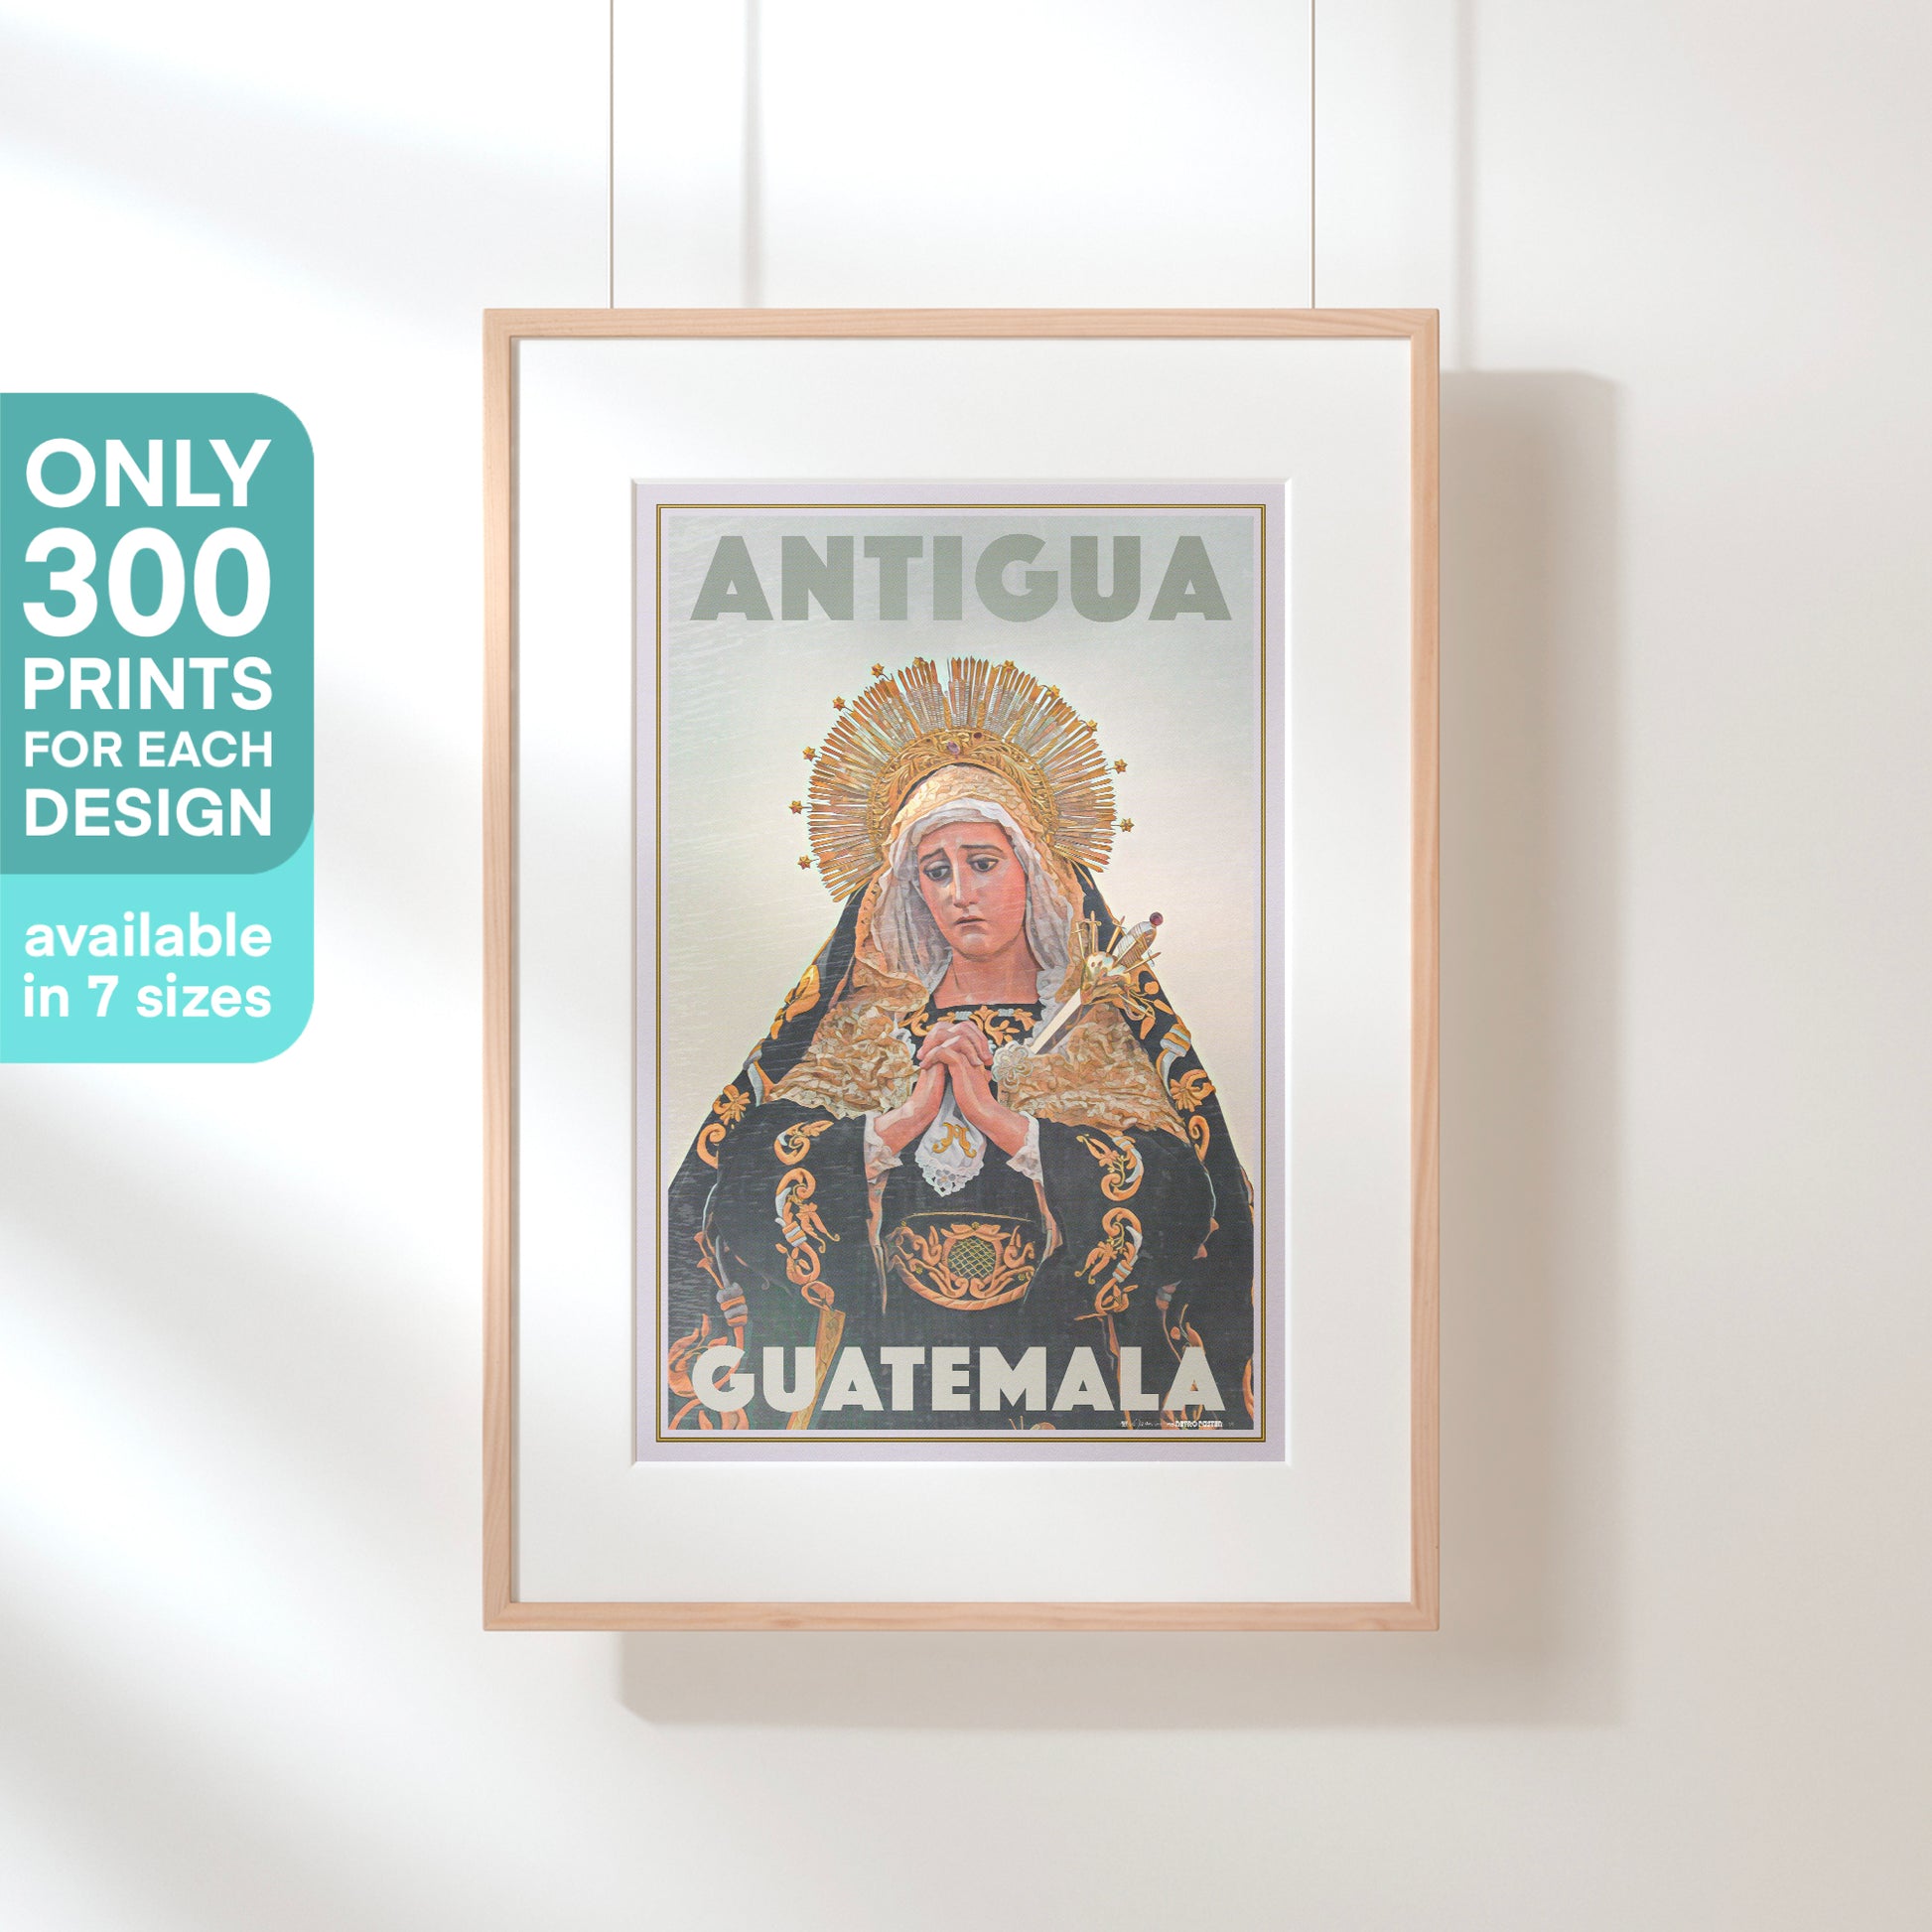 Virgin Mary Antigua poster framed elegantly, showcasing the limited edition label that signifies Alecse's exclusive artwork